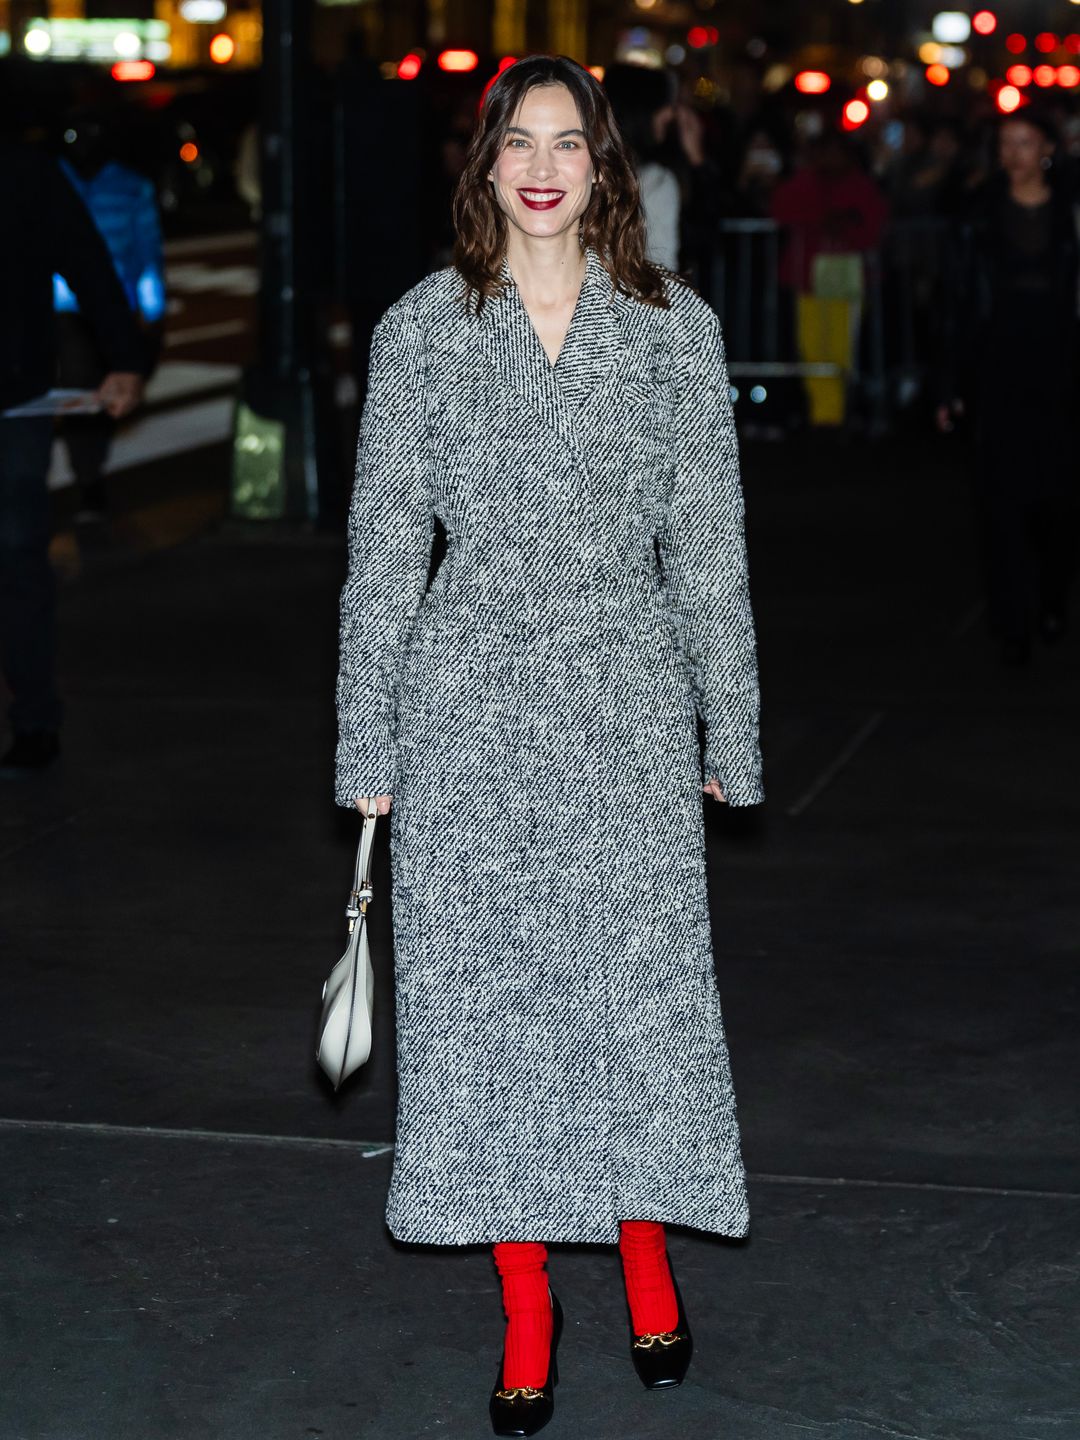 Alexa Chung attends the Tory Burch fashion show in a long grey coat with red socks and black heels 